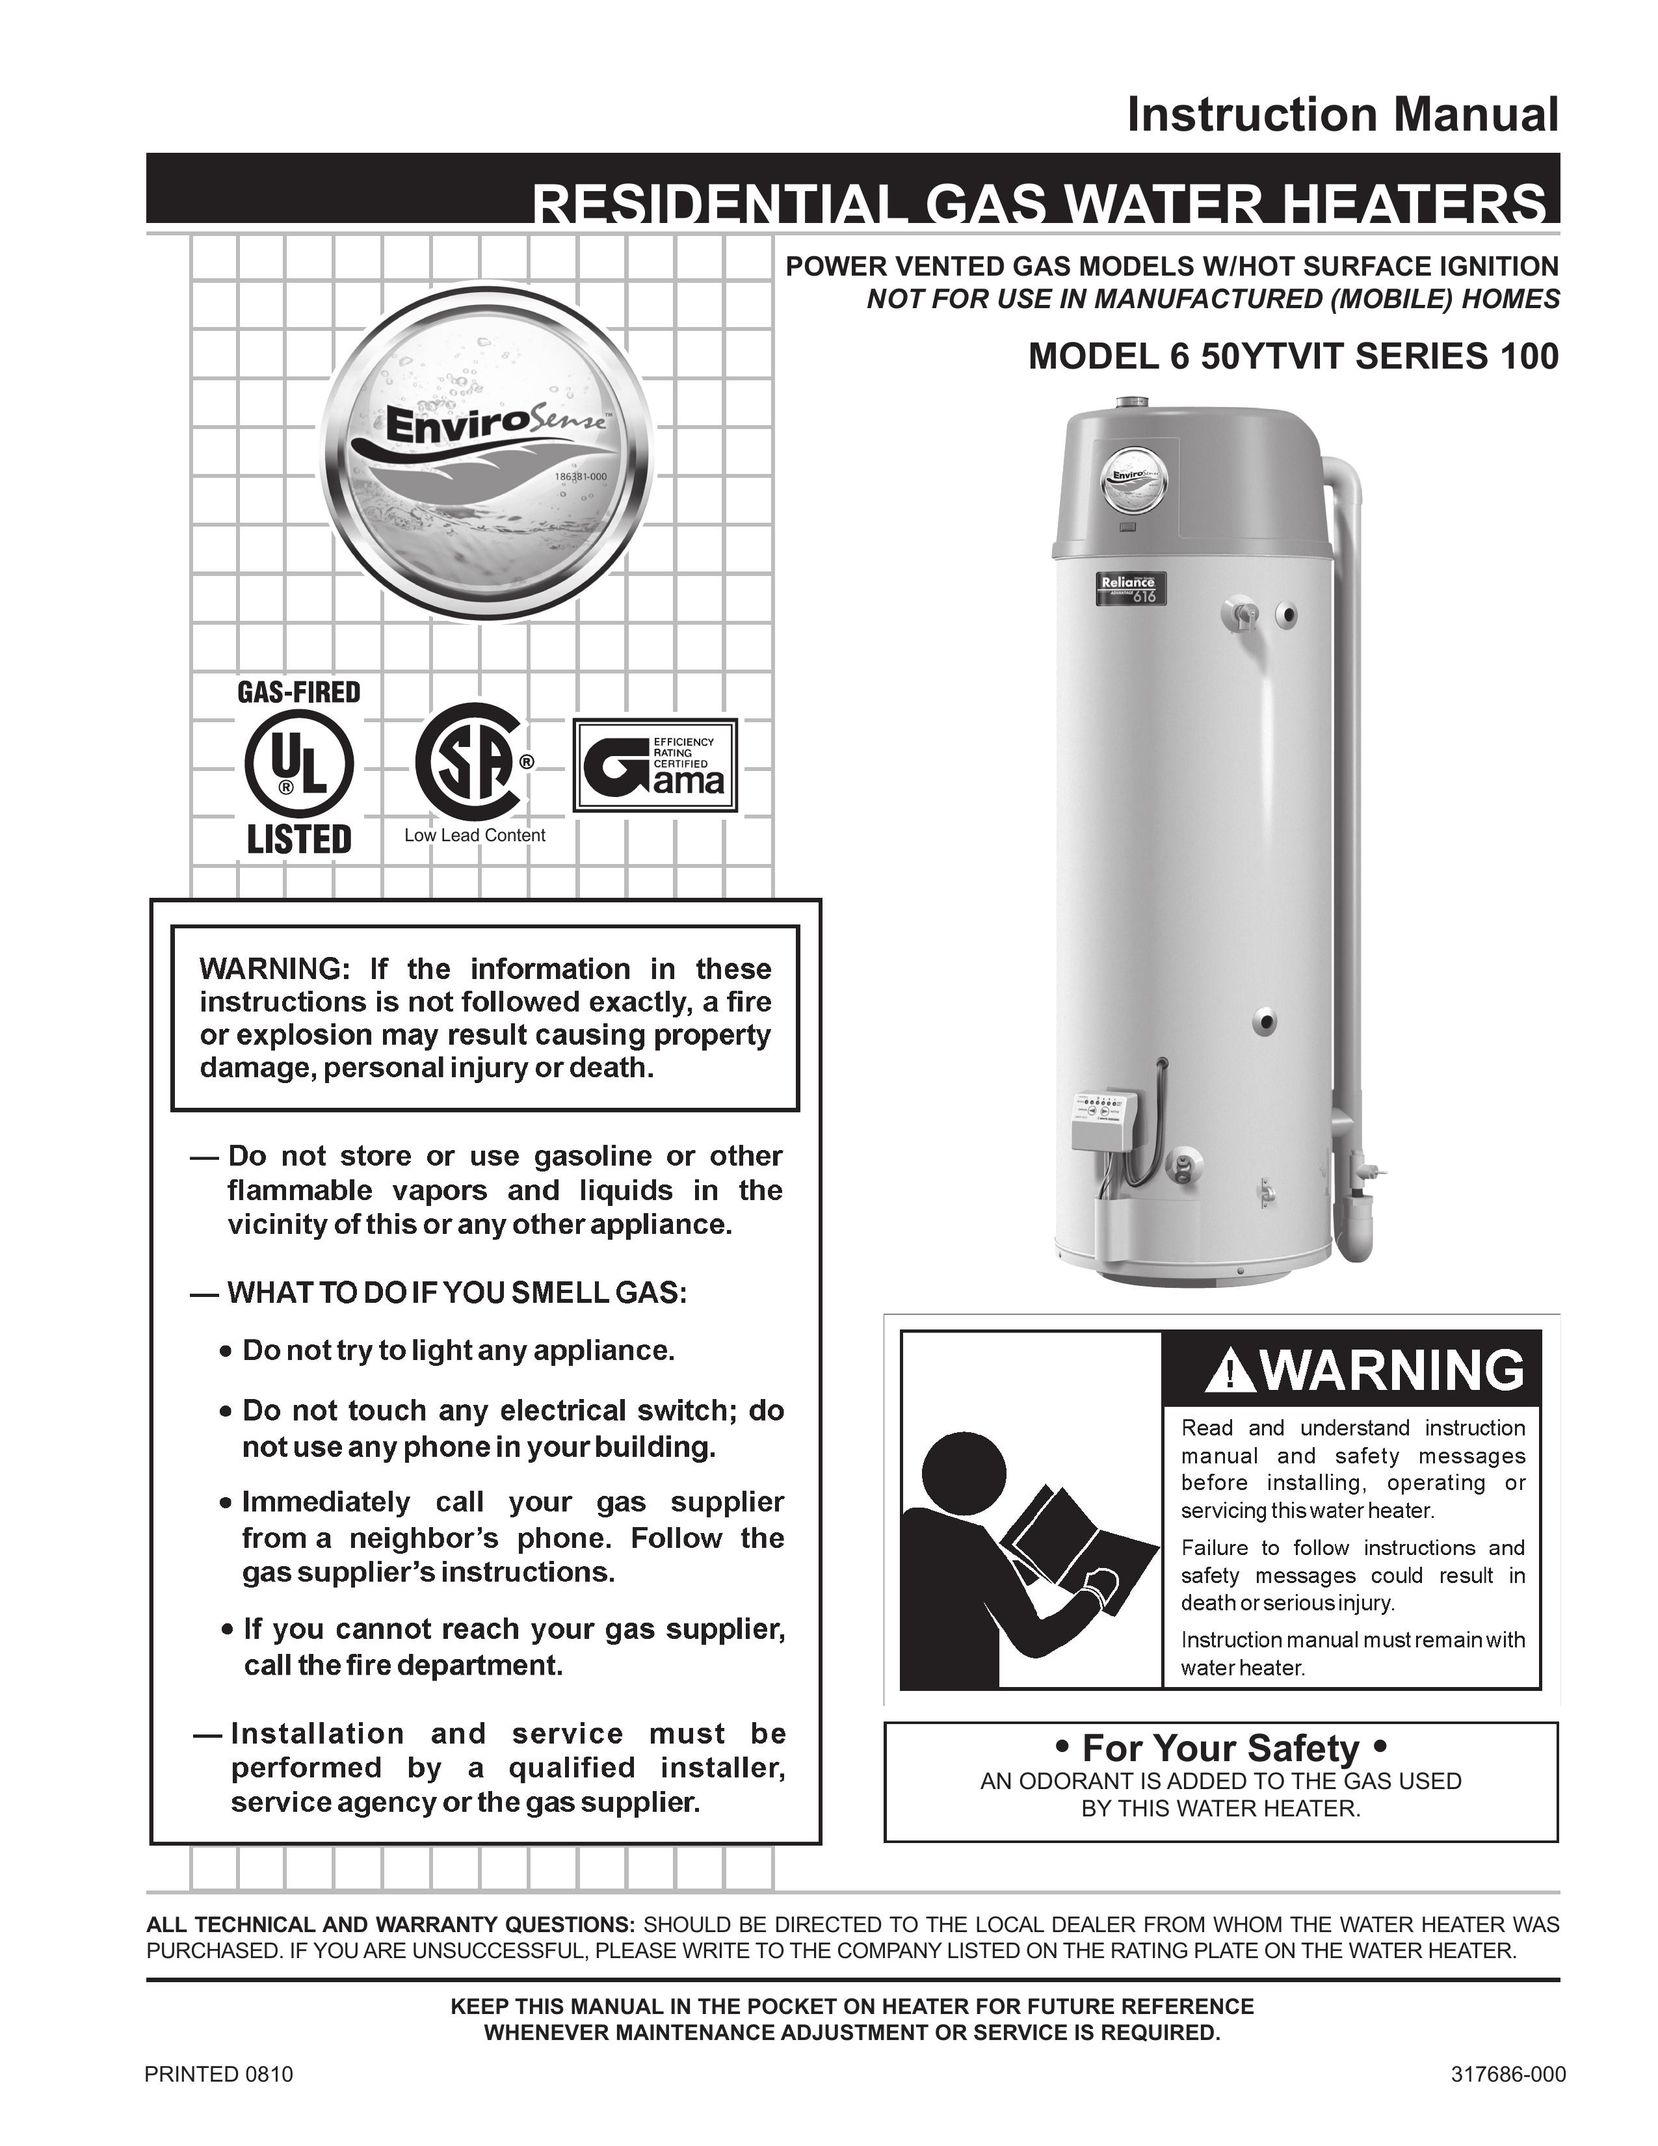 Reliance Water Heaters 6 50YTVIT SERIES 100 Water Heater User Manual